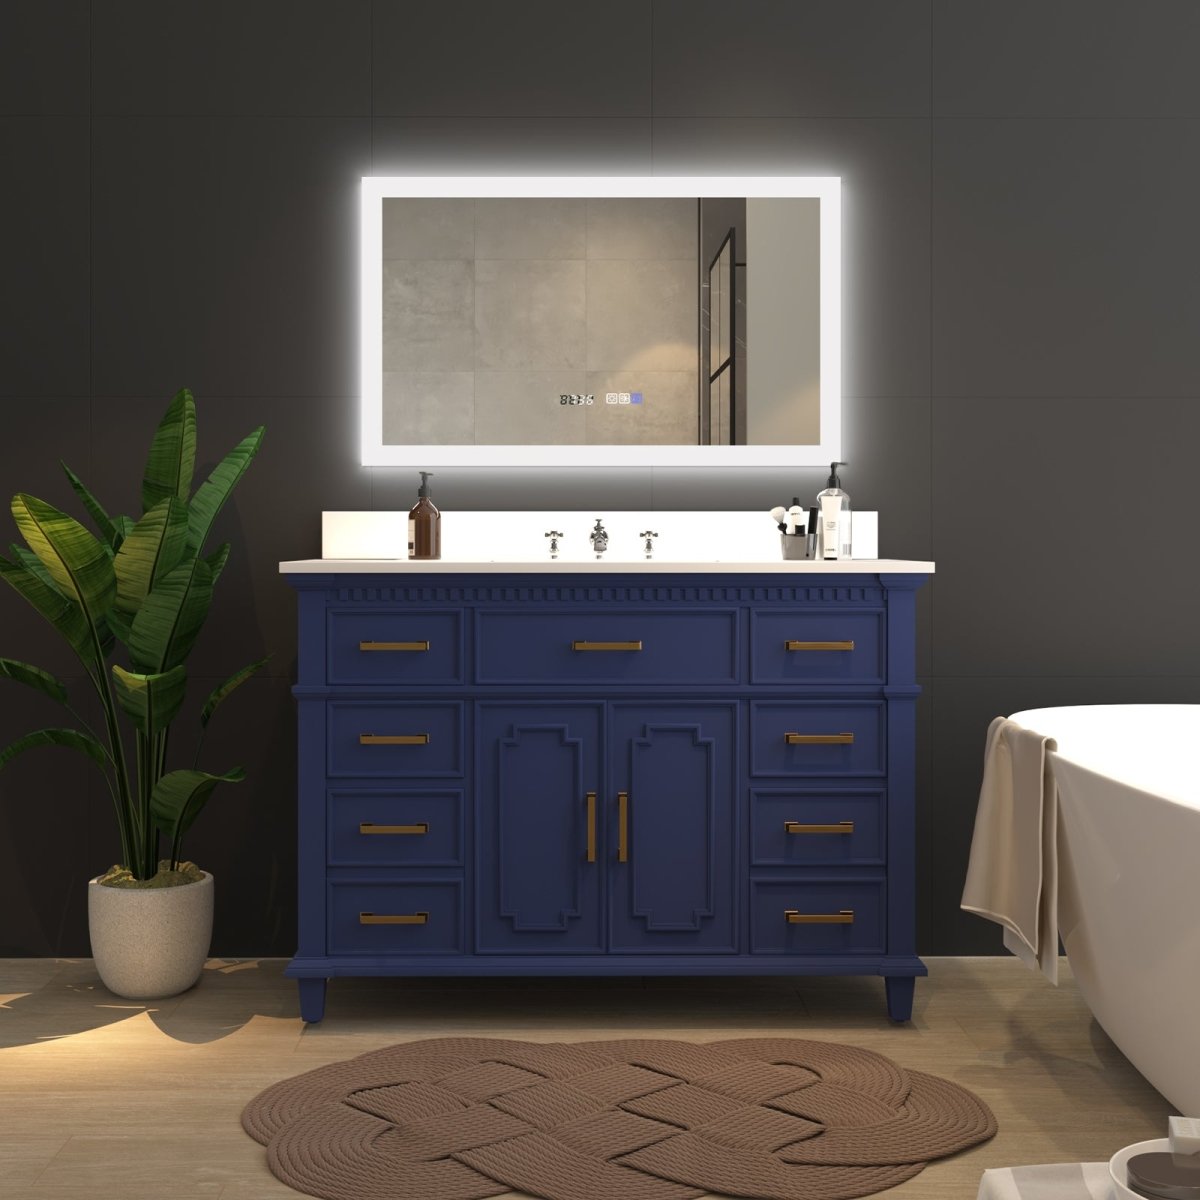 LED Bathroom Mirror with Lights, 40x24 Inch LED Backlit + Front Lighted  Bathroom Smart Mirror for Vanity with High Lume, Anti-Fog and Dimmable Light